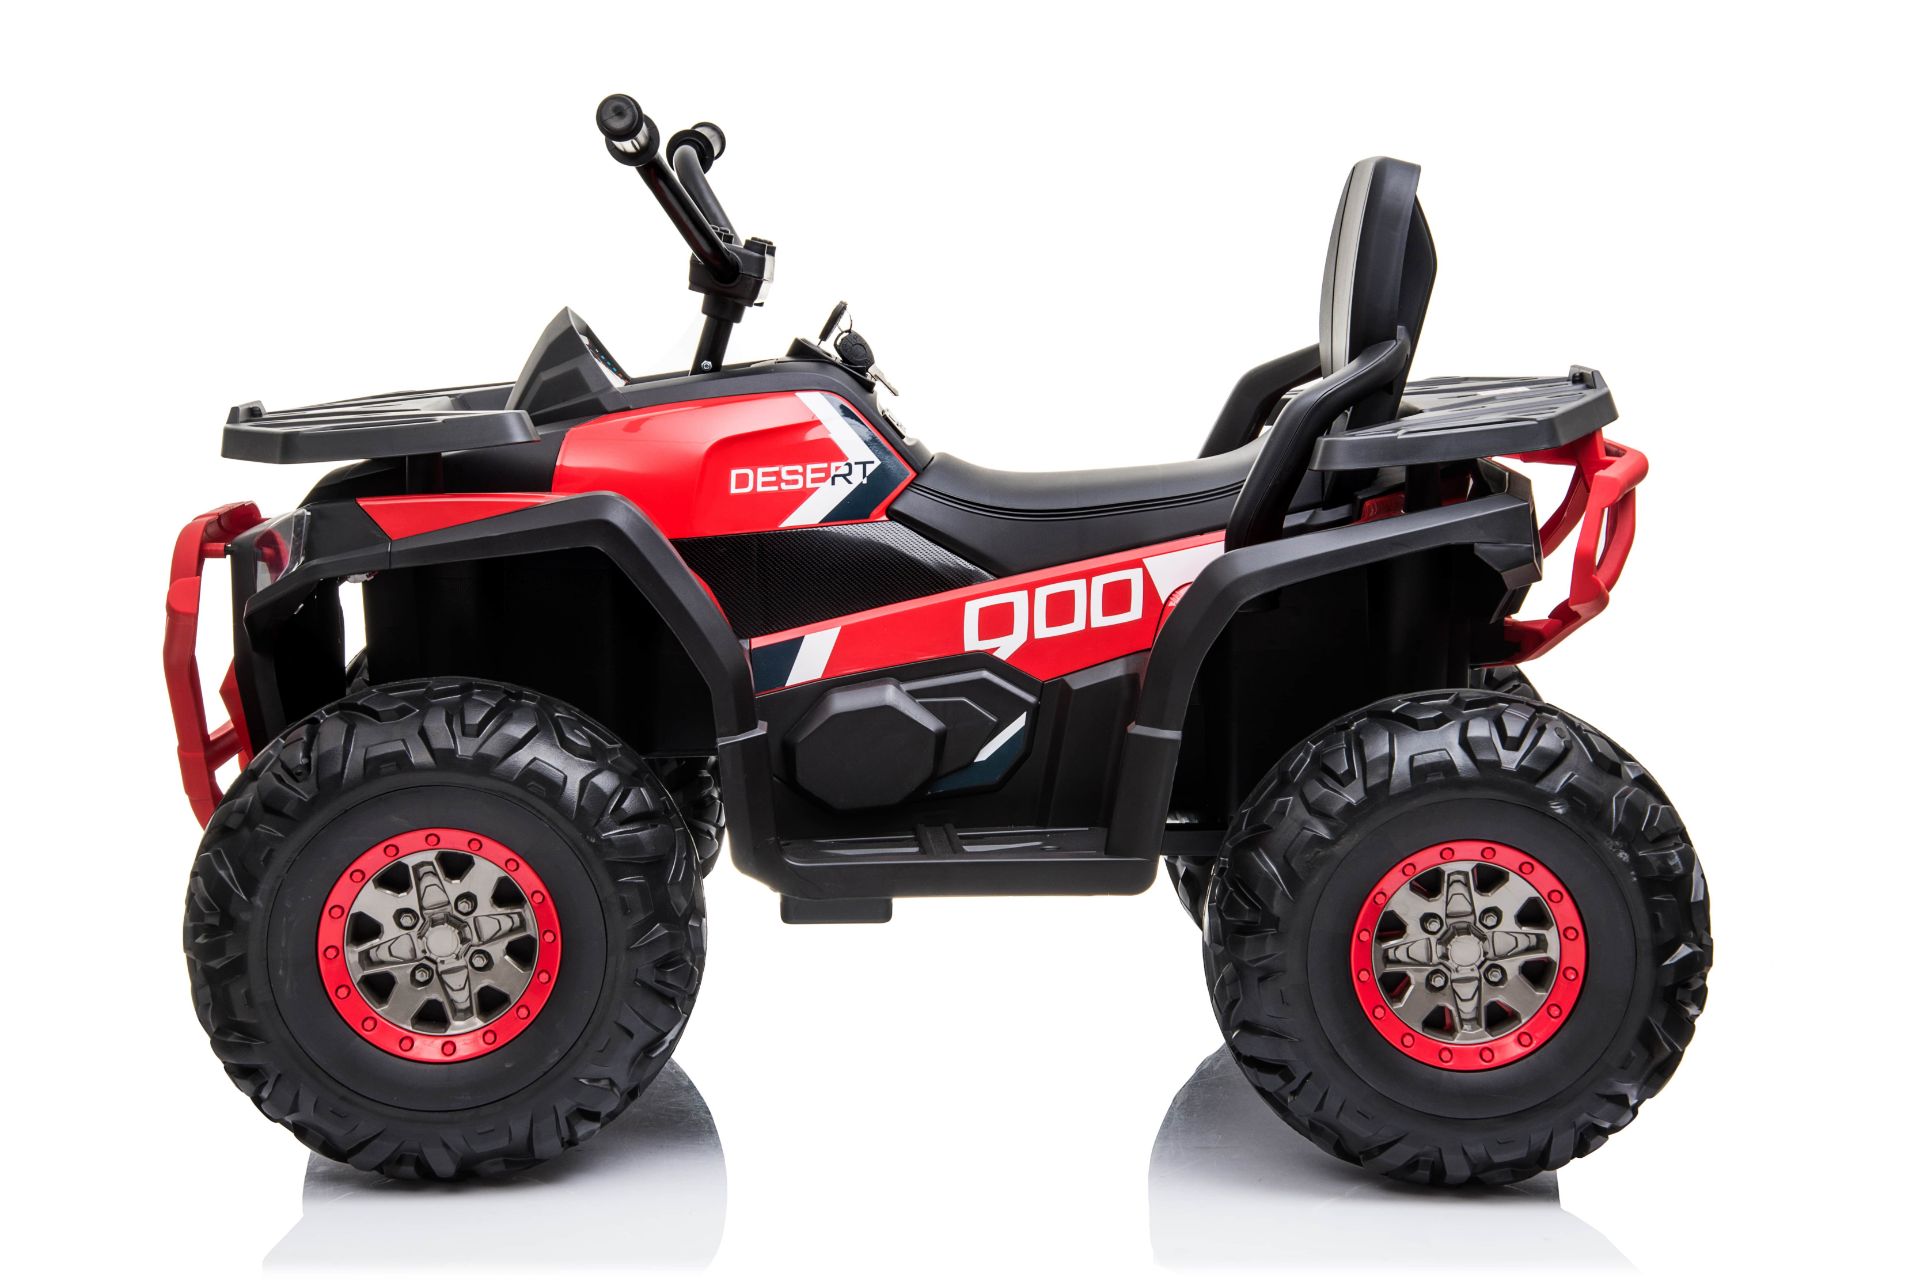 4 x Brand New Ride On Childs Quad Bike 12v with Parental Remote Control - Image 8 of 10